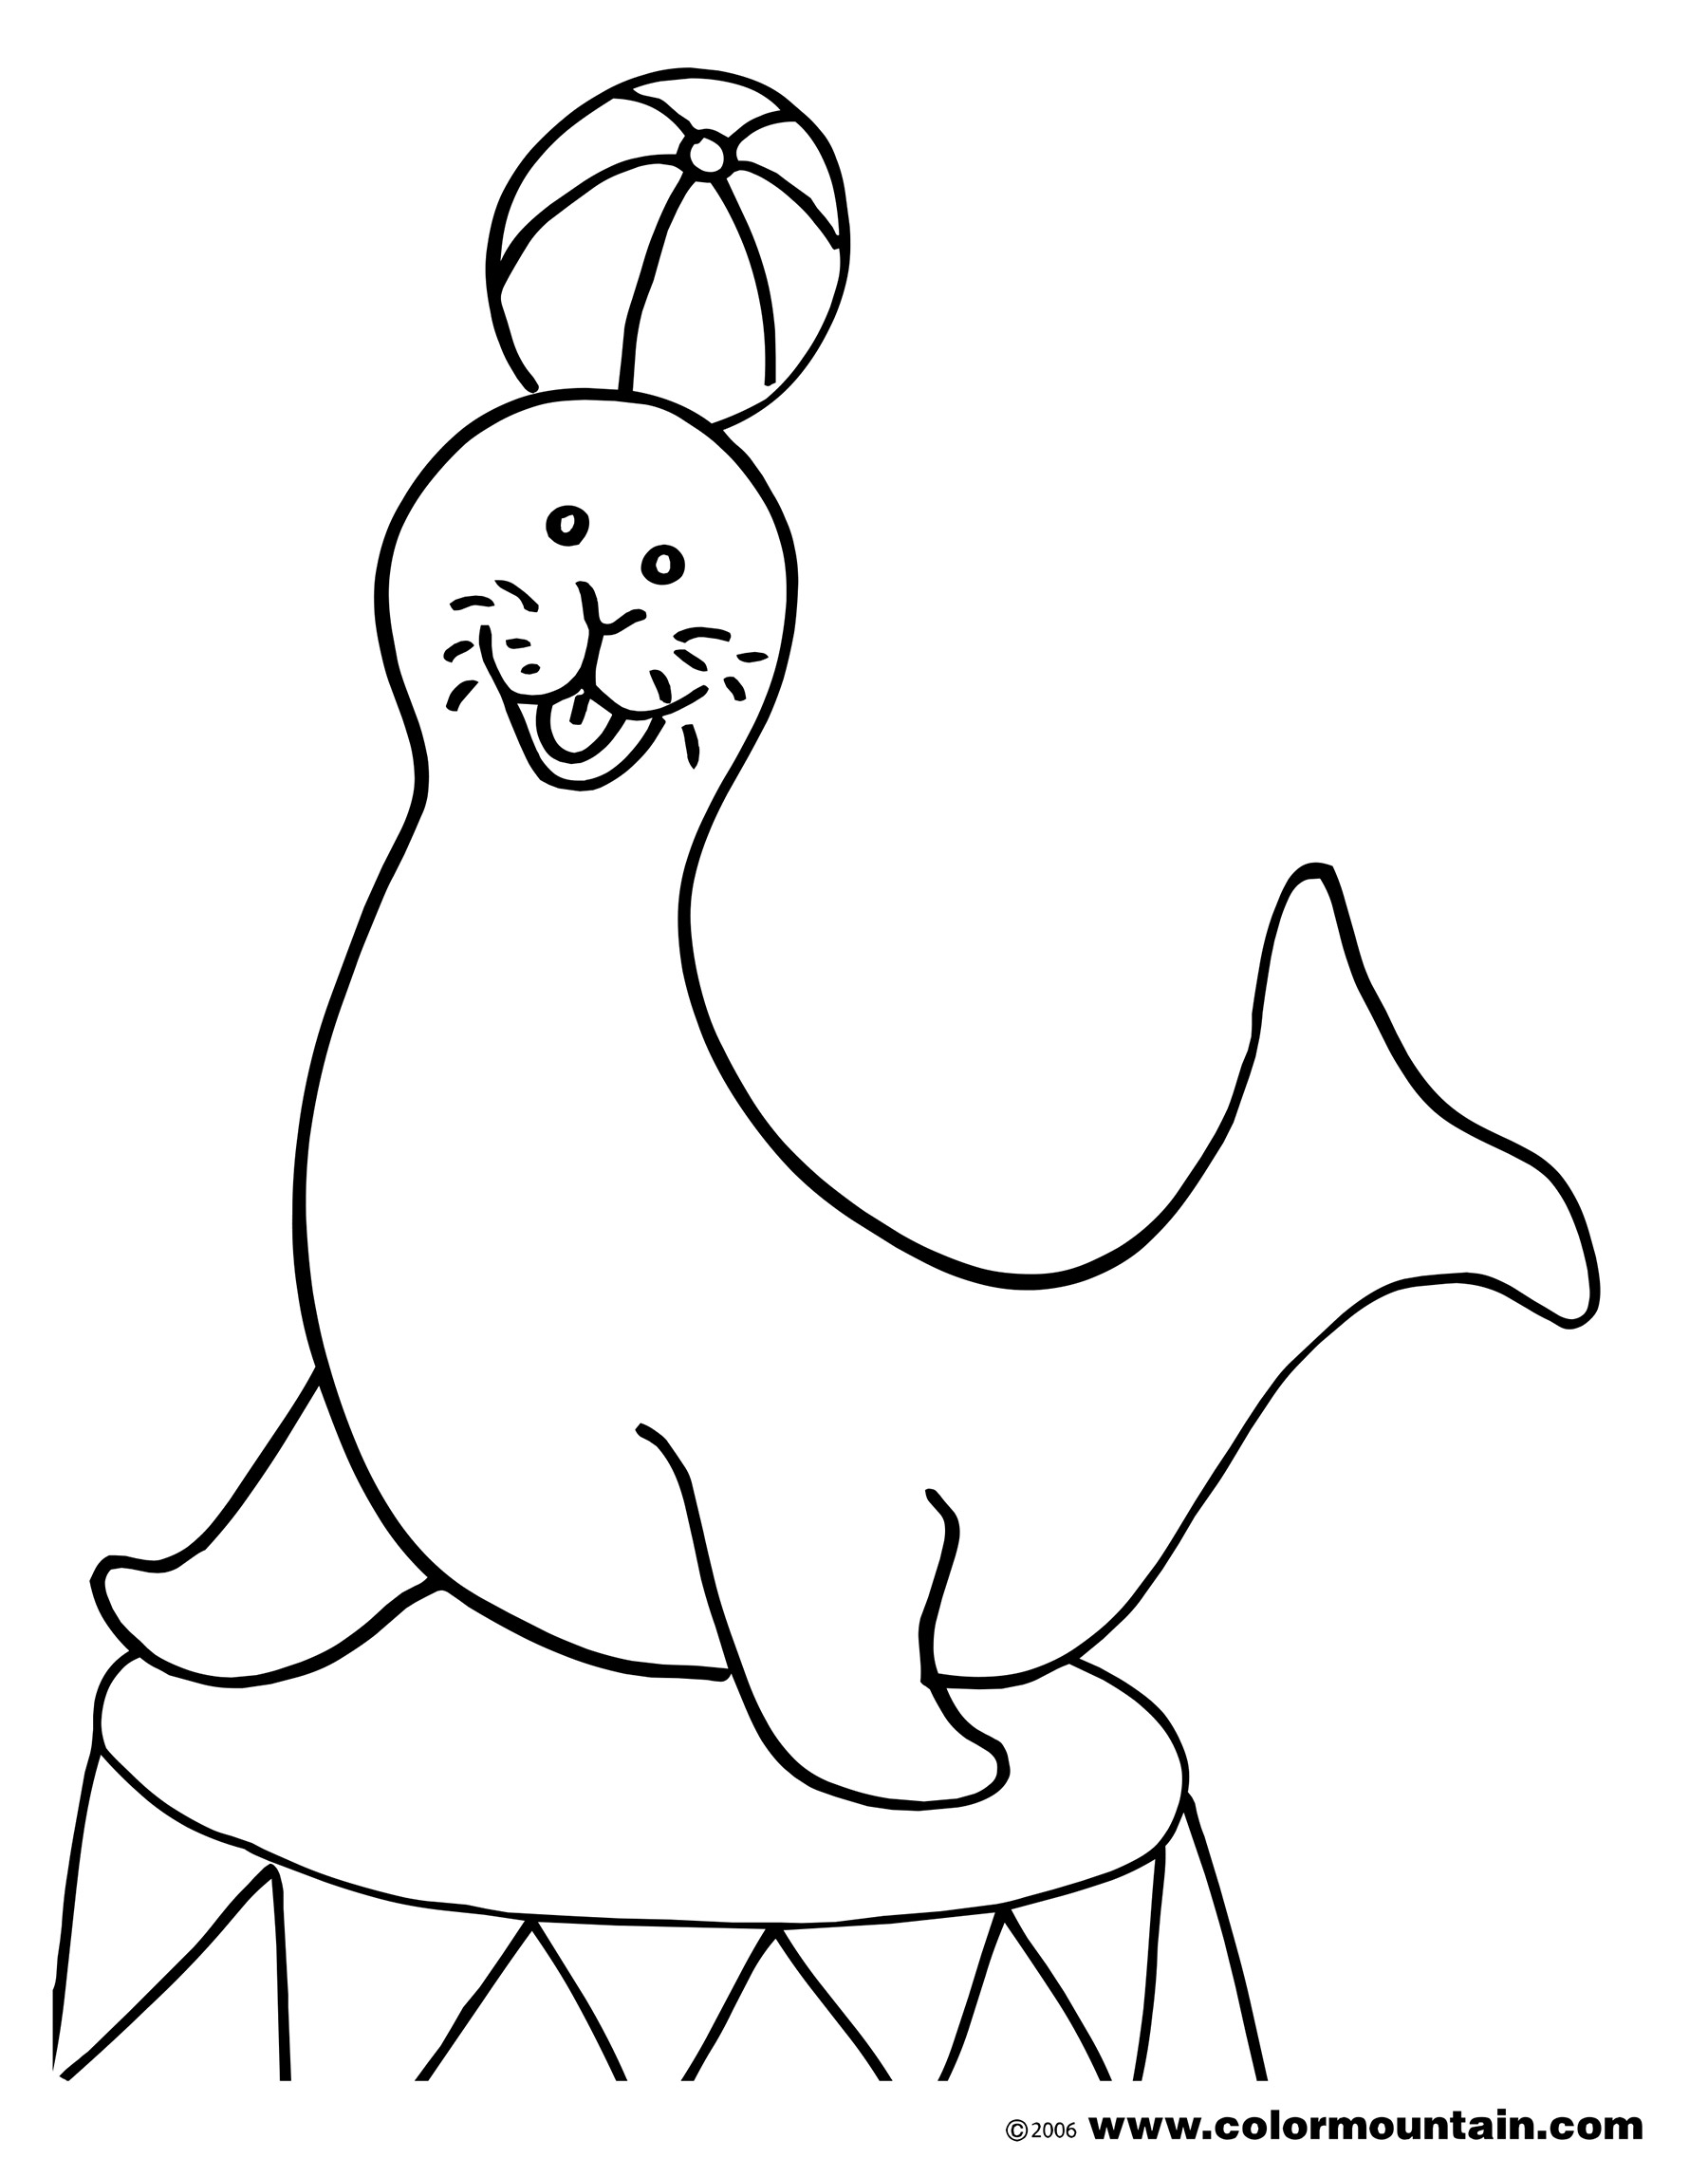 Download Seal coloring pages download and print for free